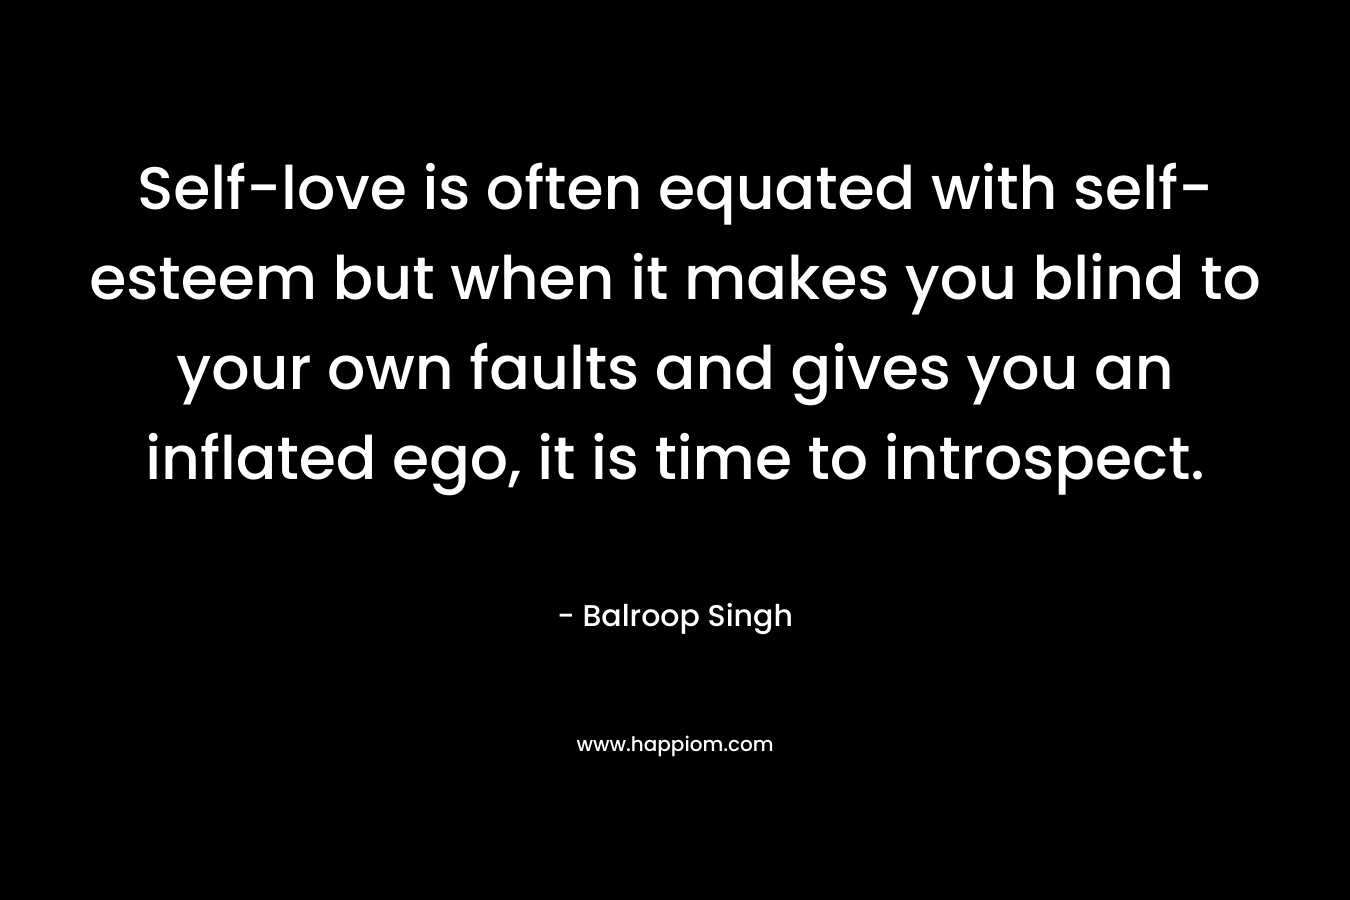 Self-love is often equated with self-esteem but when it makes you blind to your own faults and gives you an inflated ego, it is time to introspect. – Balroop Singh